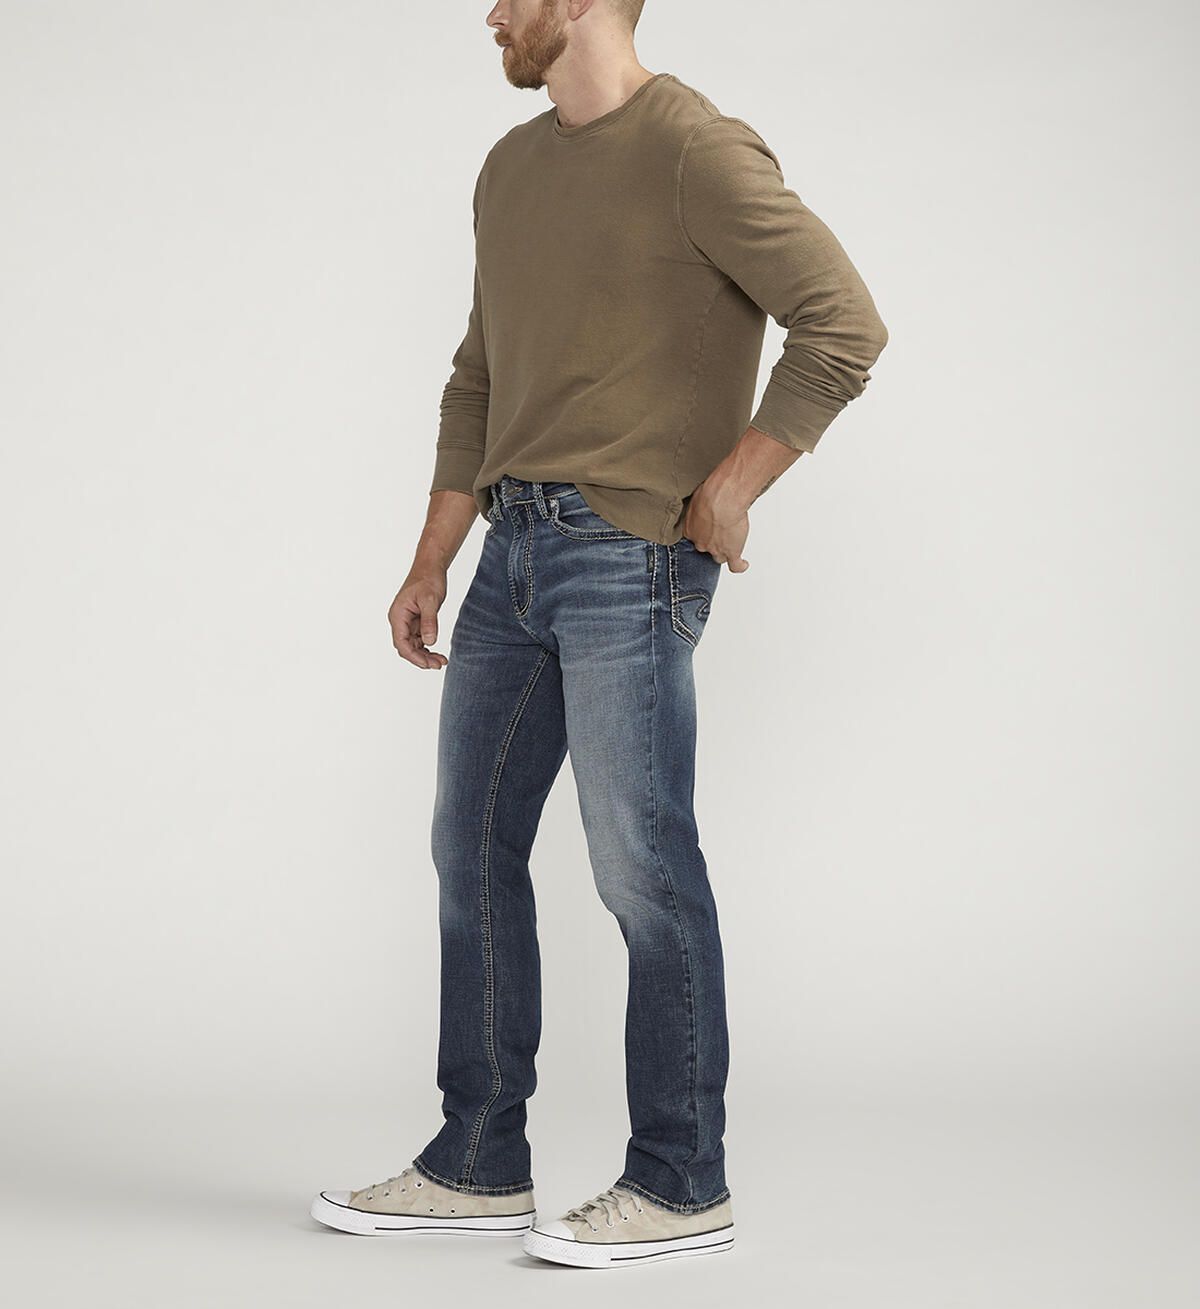 Grayson Classic Fit Straight Leg Jeans, , hi-res image number 2